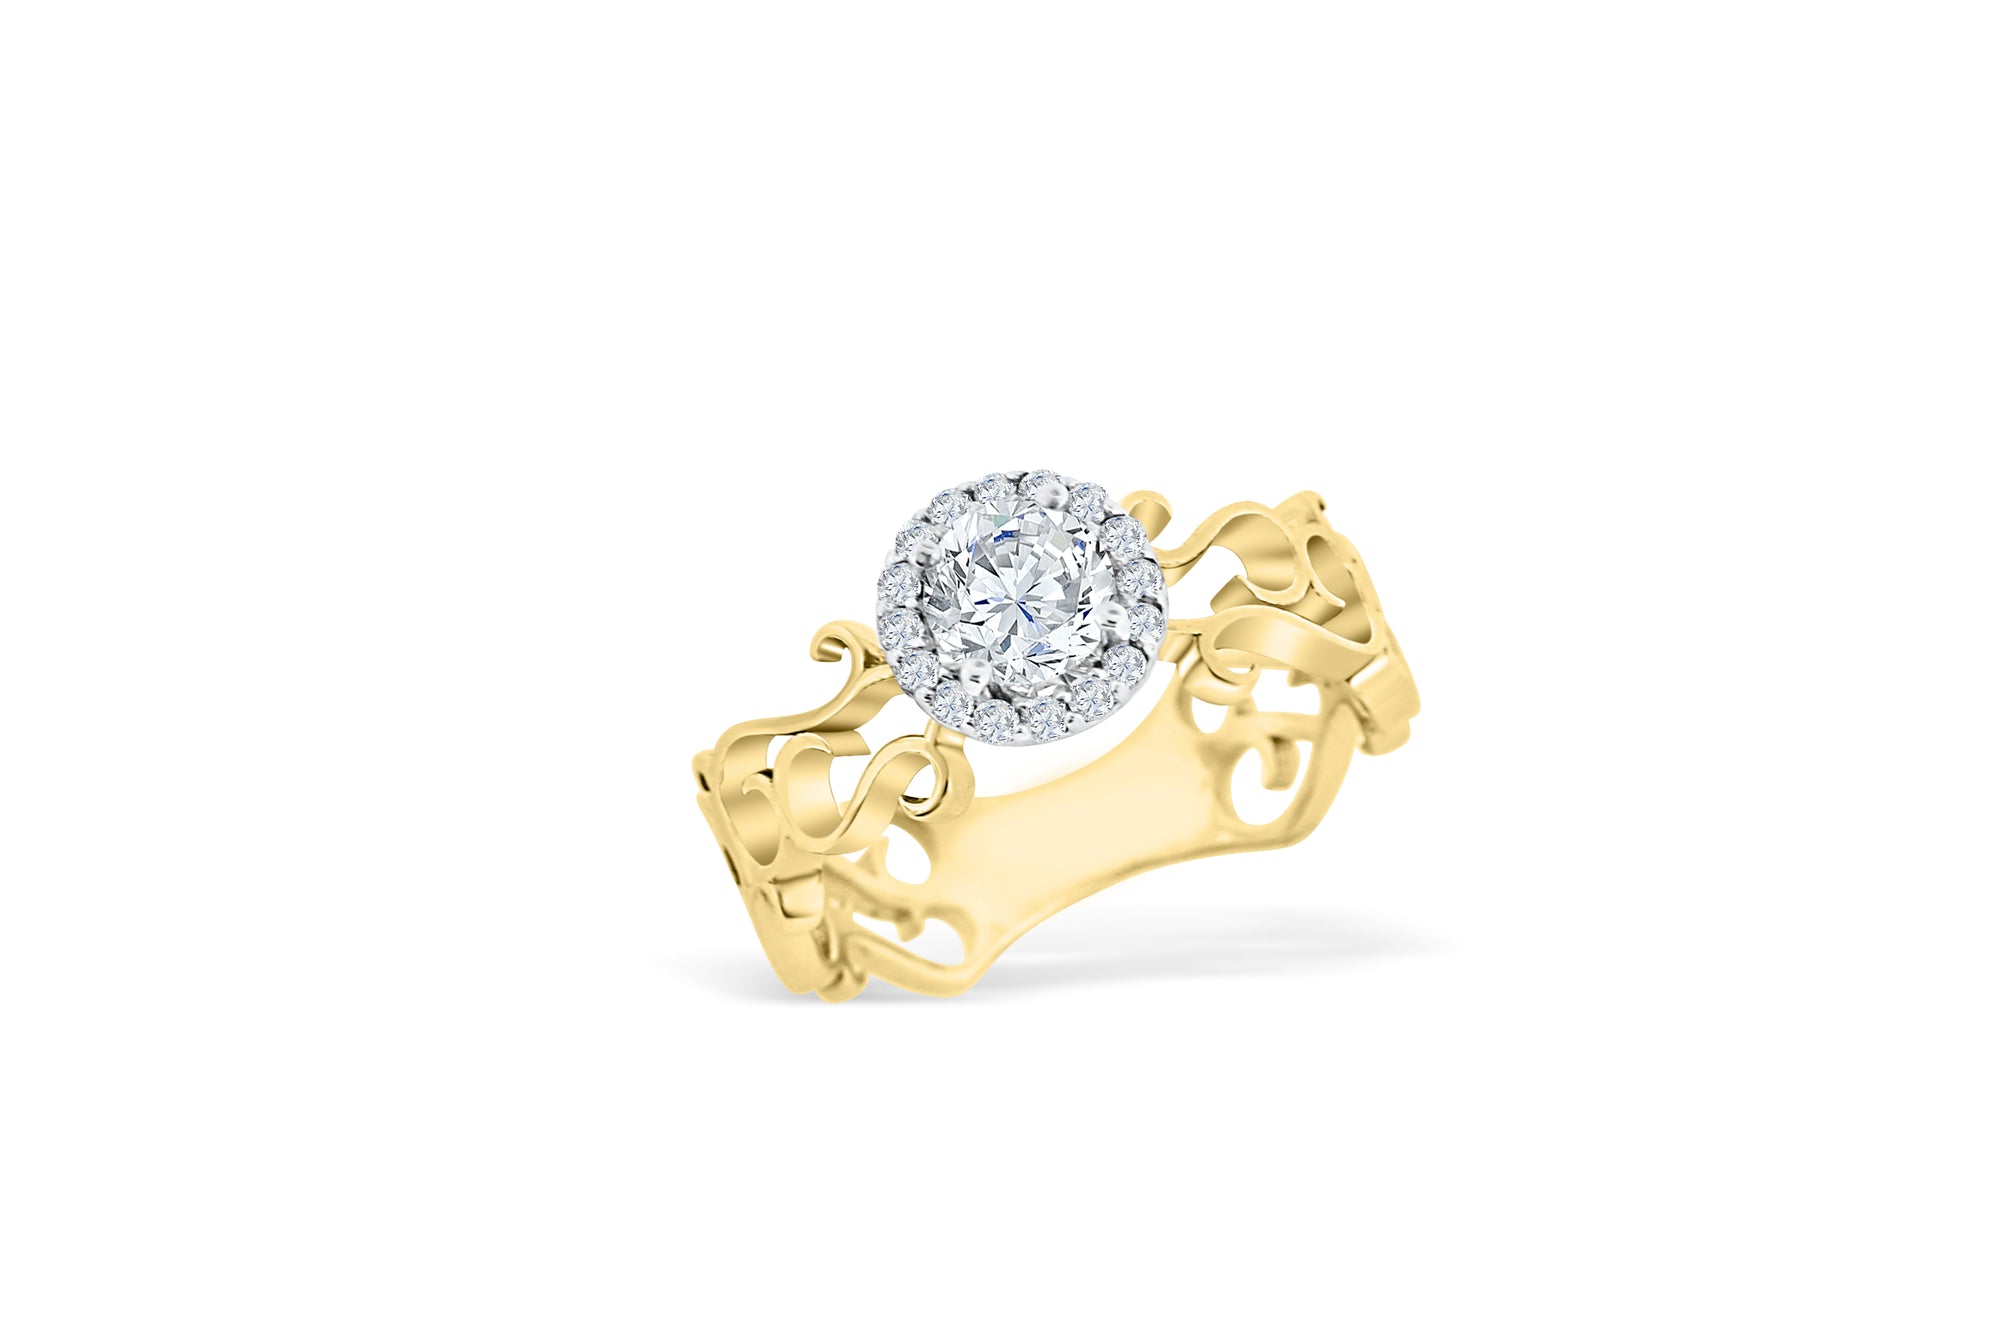 Two Toned Diamond Engagement Ring 0.76 ct tw 14K Yellow/White Gold DENG050 - NorthandSouthJewelry